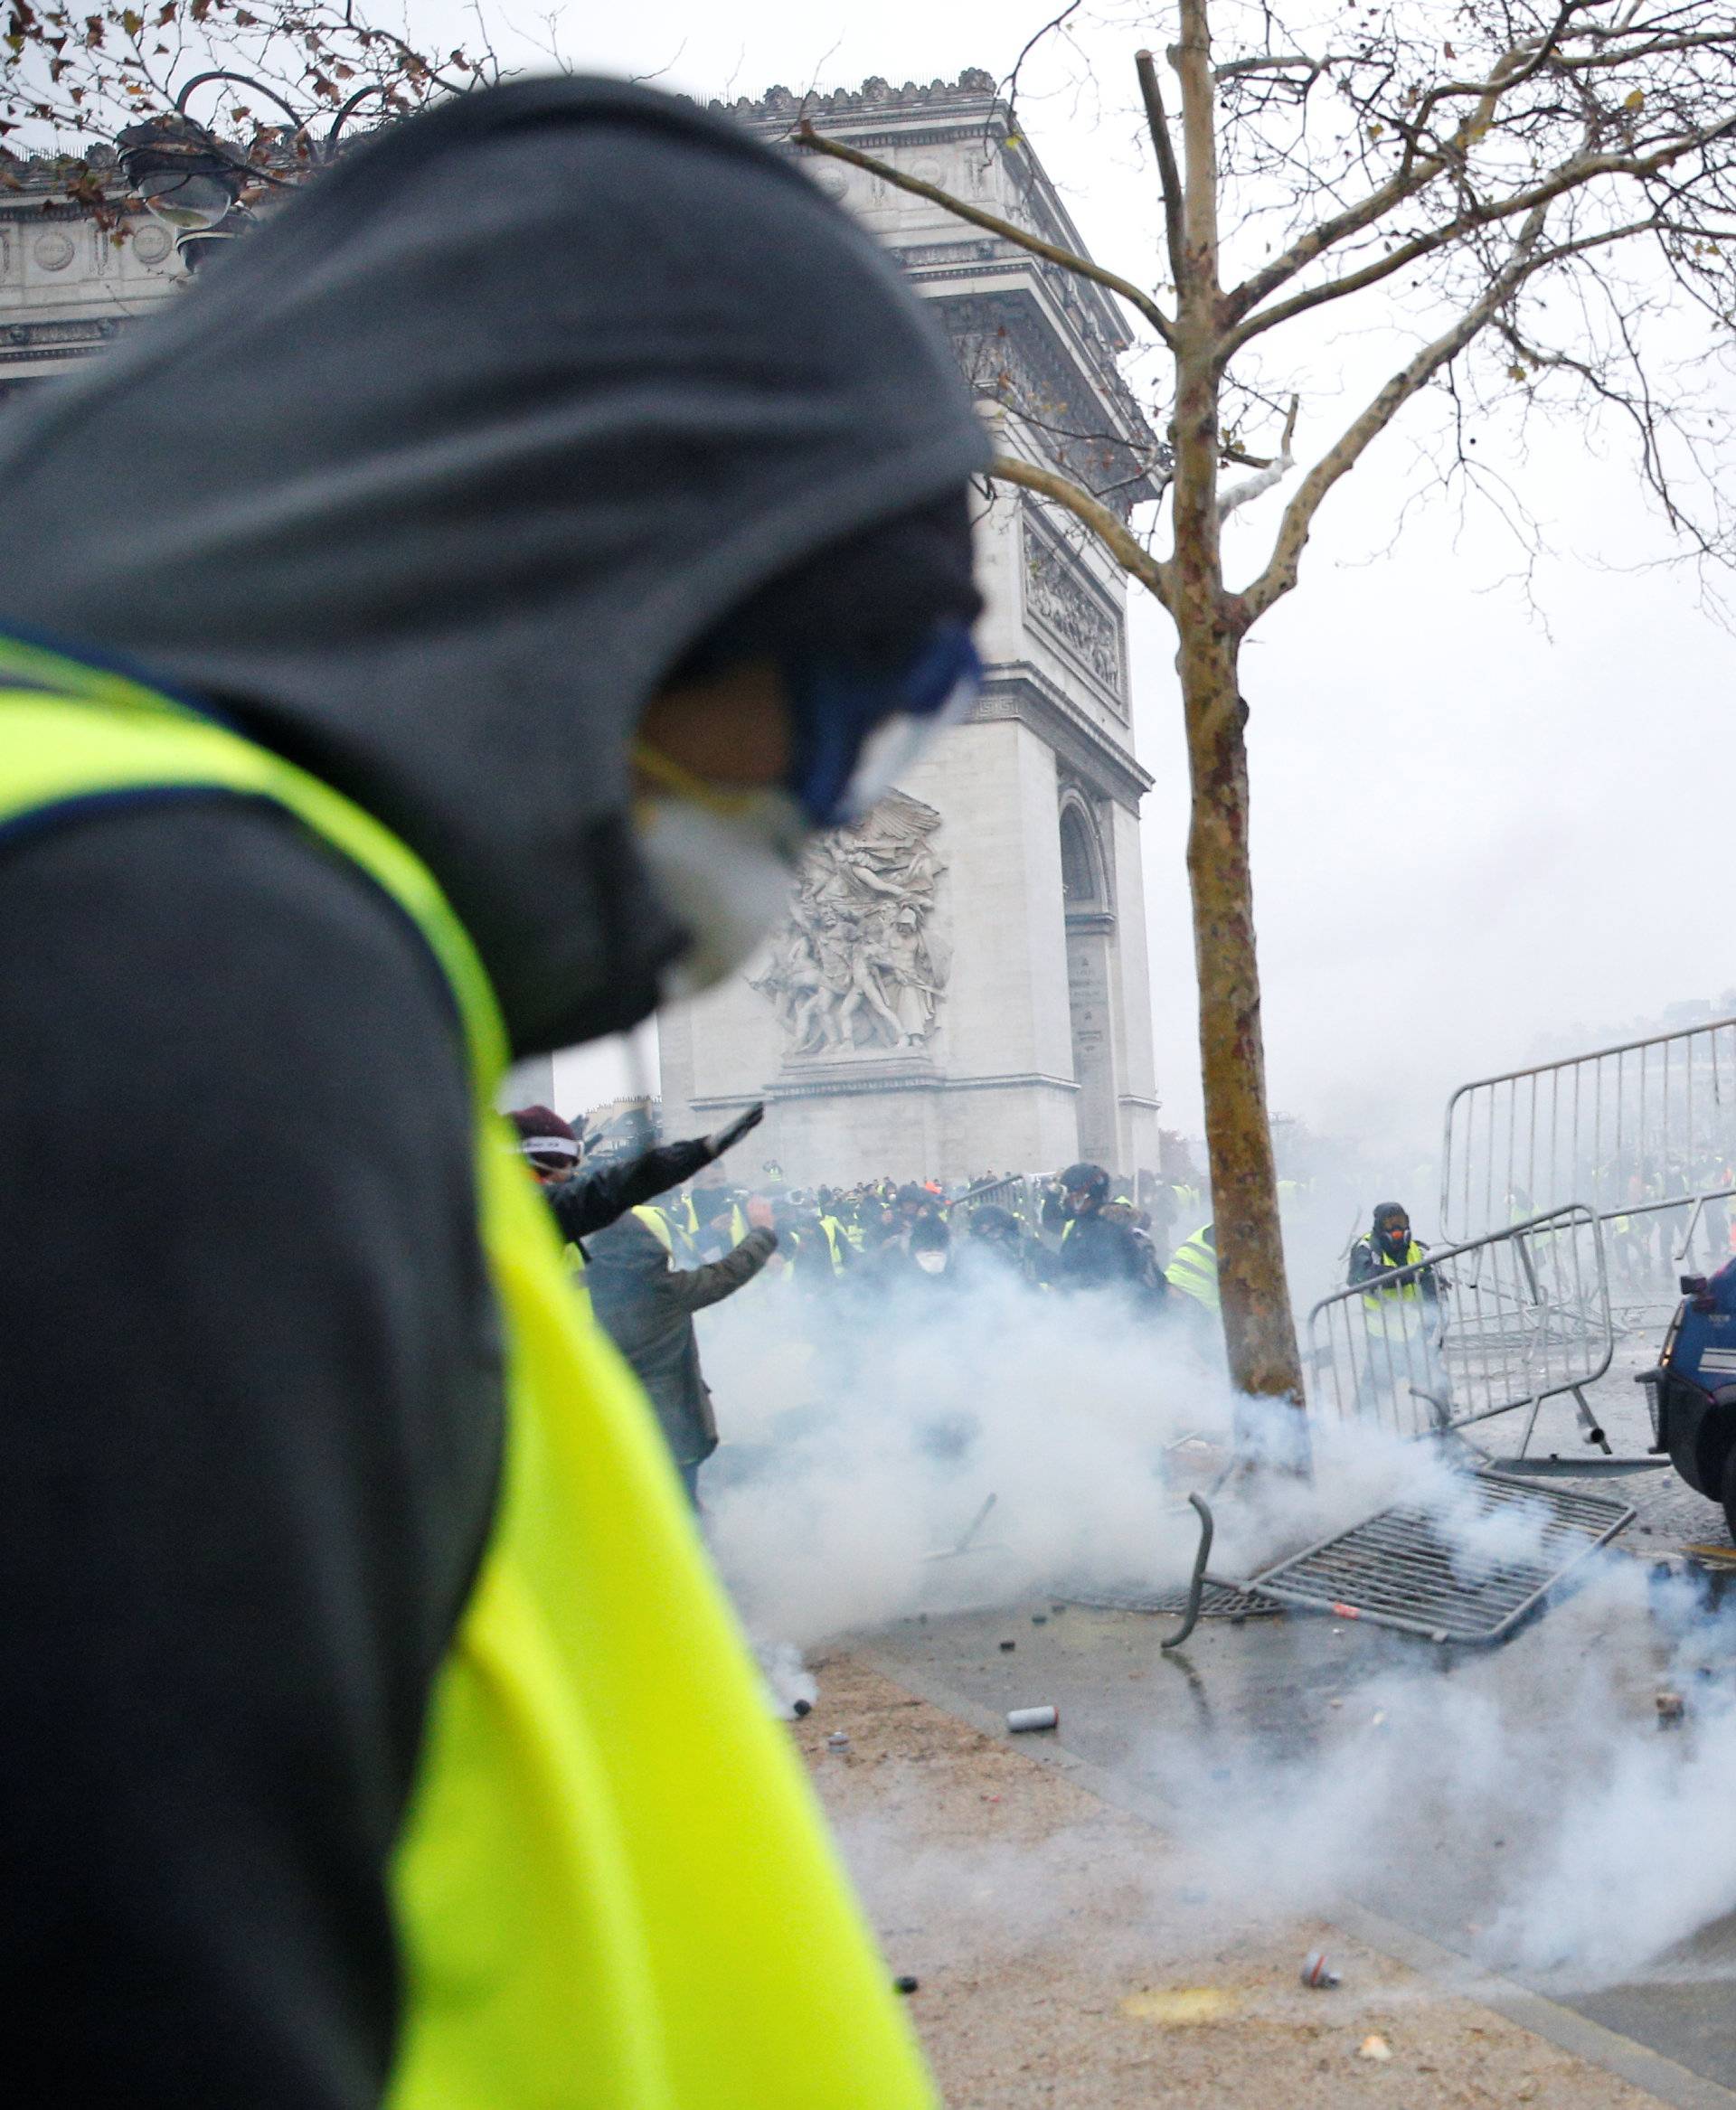 Protesters wearing yellow vests, a symbol of a French drivers' protest against higher diesel taxes, face off with French gendarmes during clashes at the Place de l'Etoile near the Arc de Triomphe in Paris